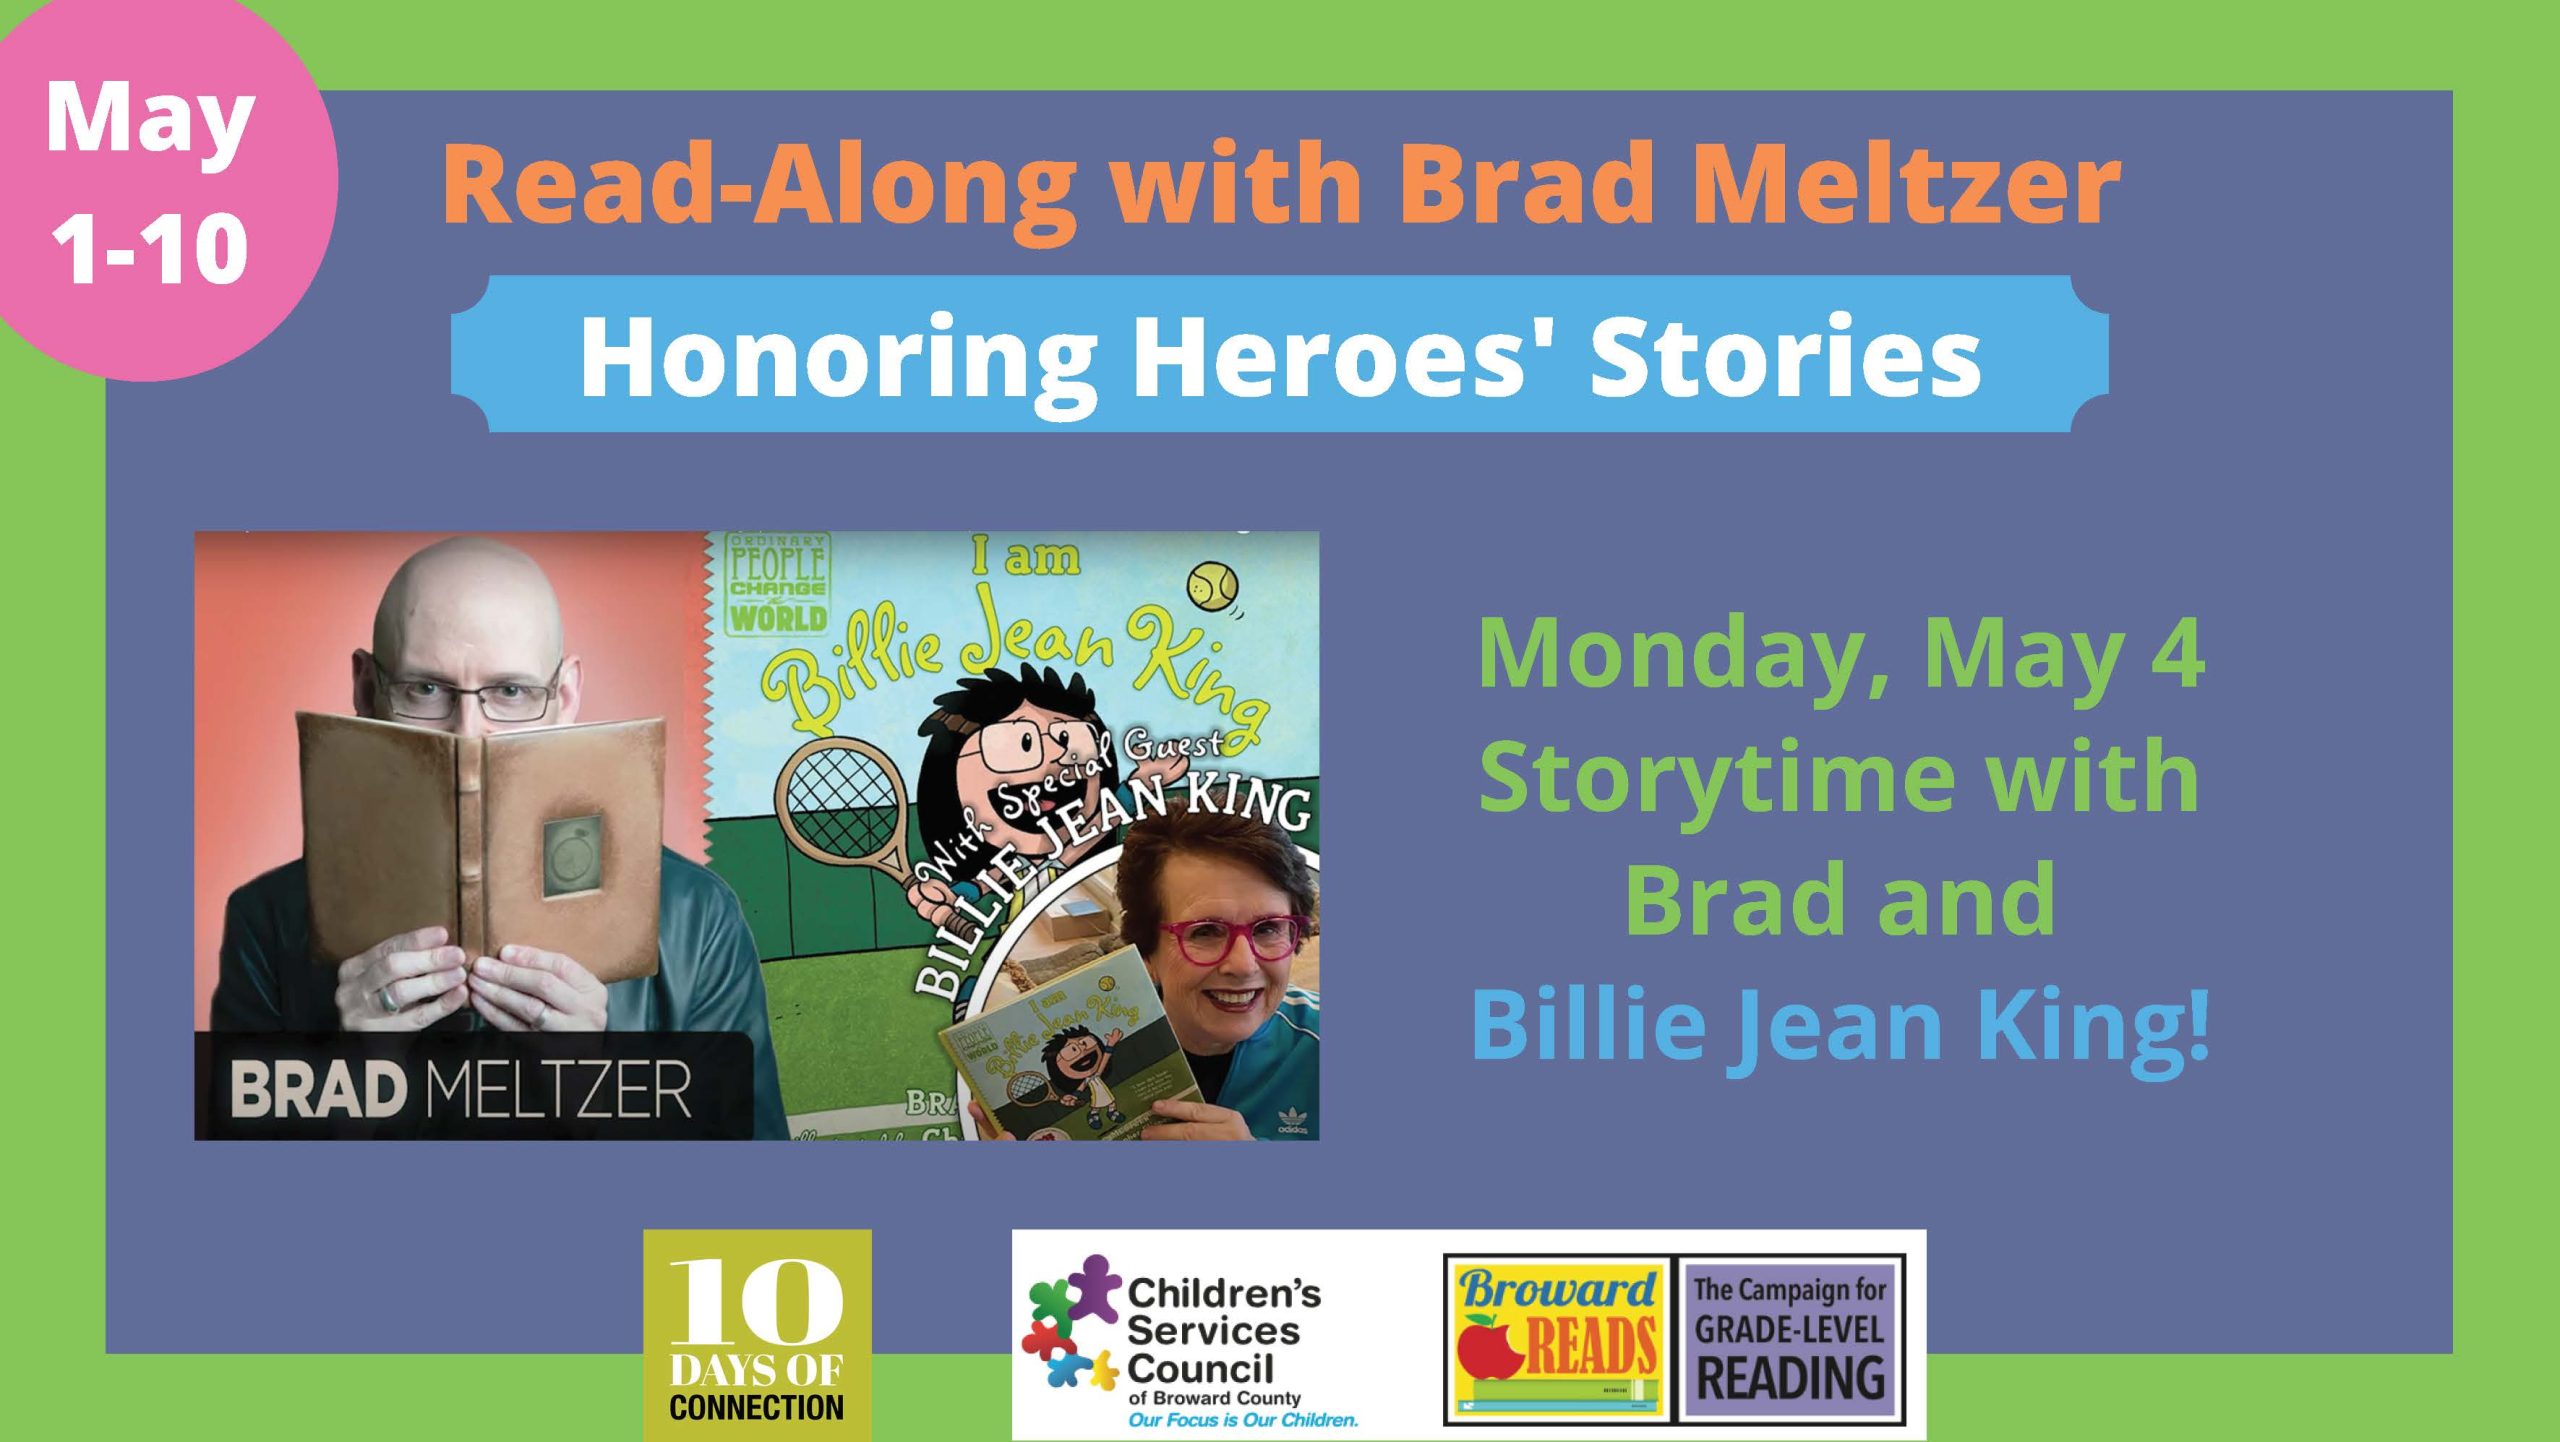 read along with brad meltzer image 2